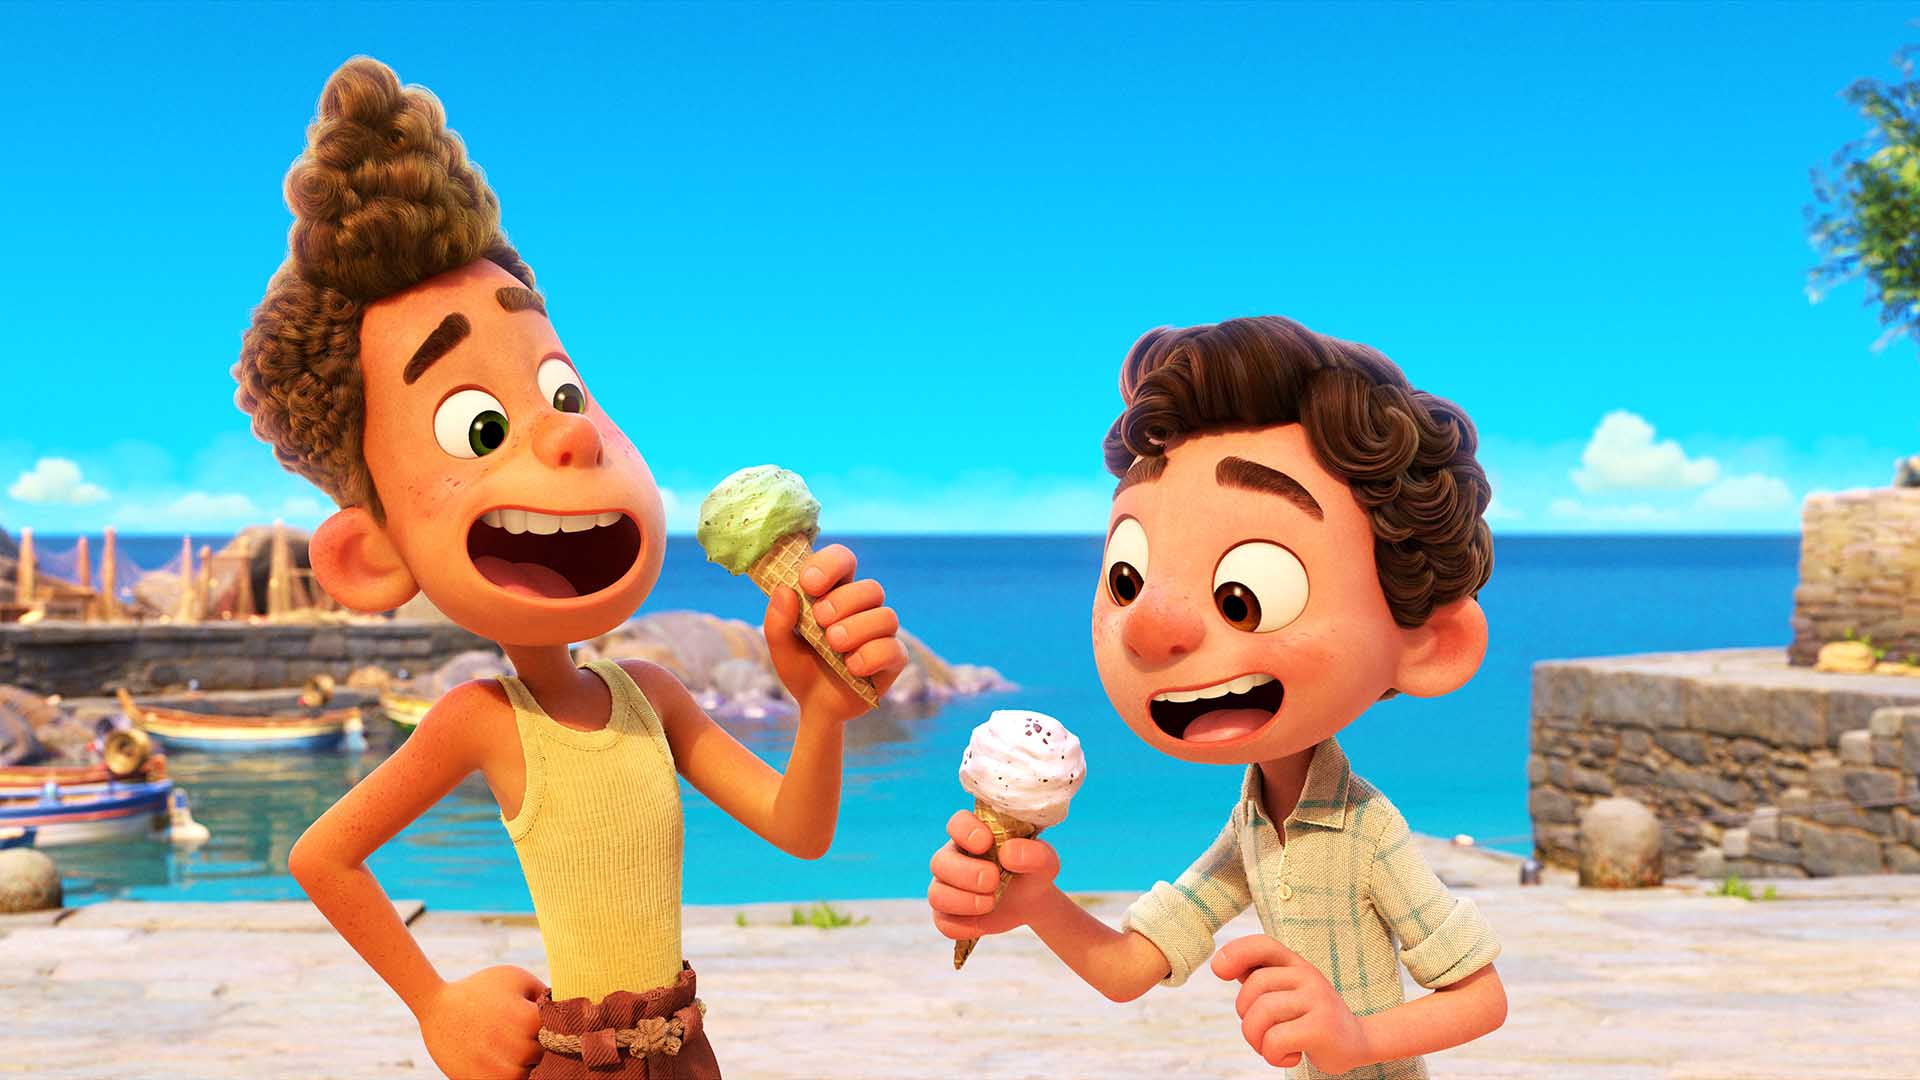 The First Trailer for Pixar's New Movie 'Luca' Will Have You Yearning for an Italian Holiday